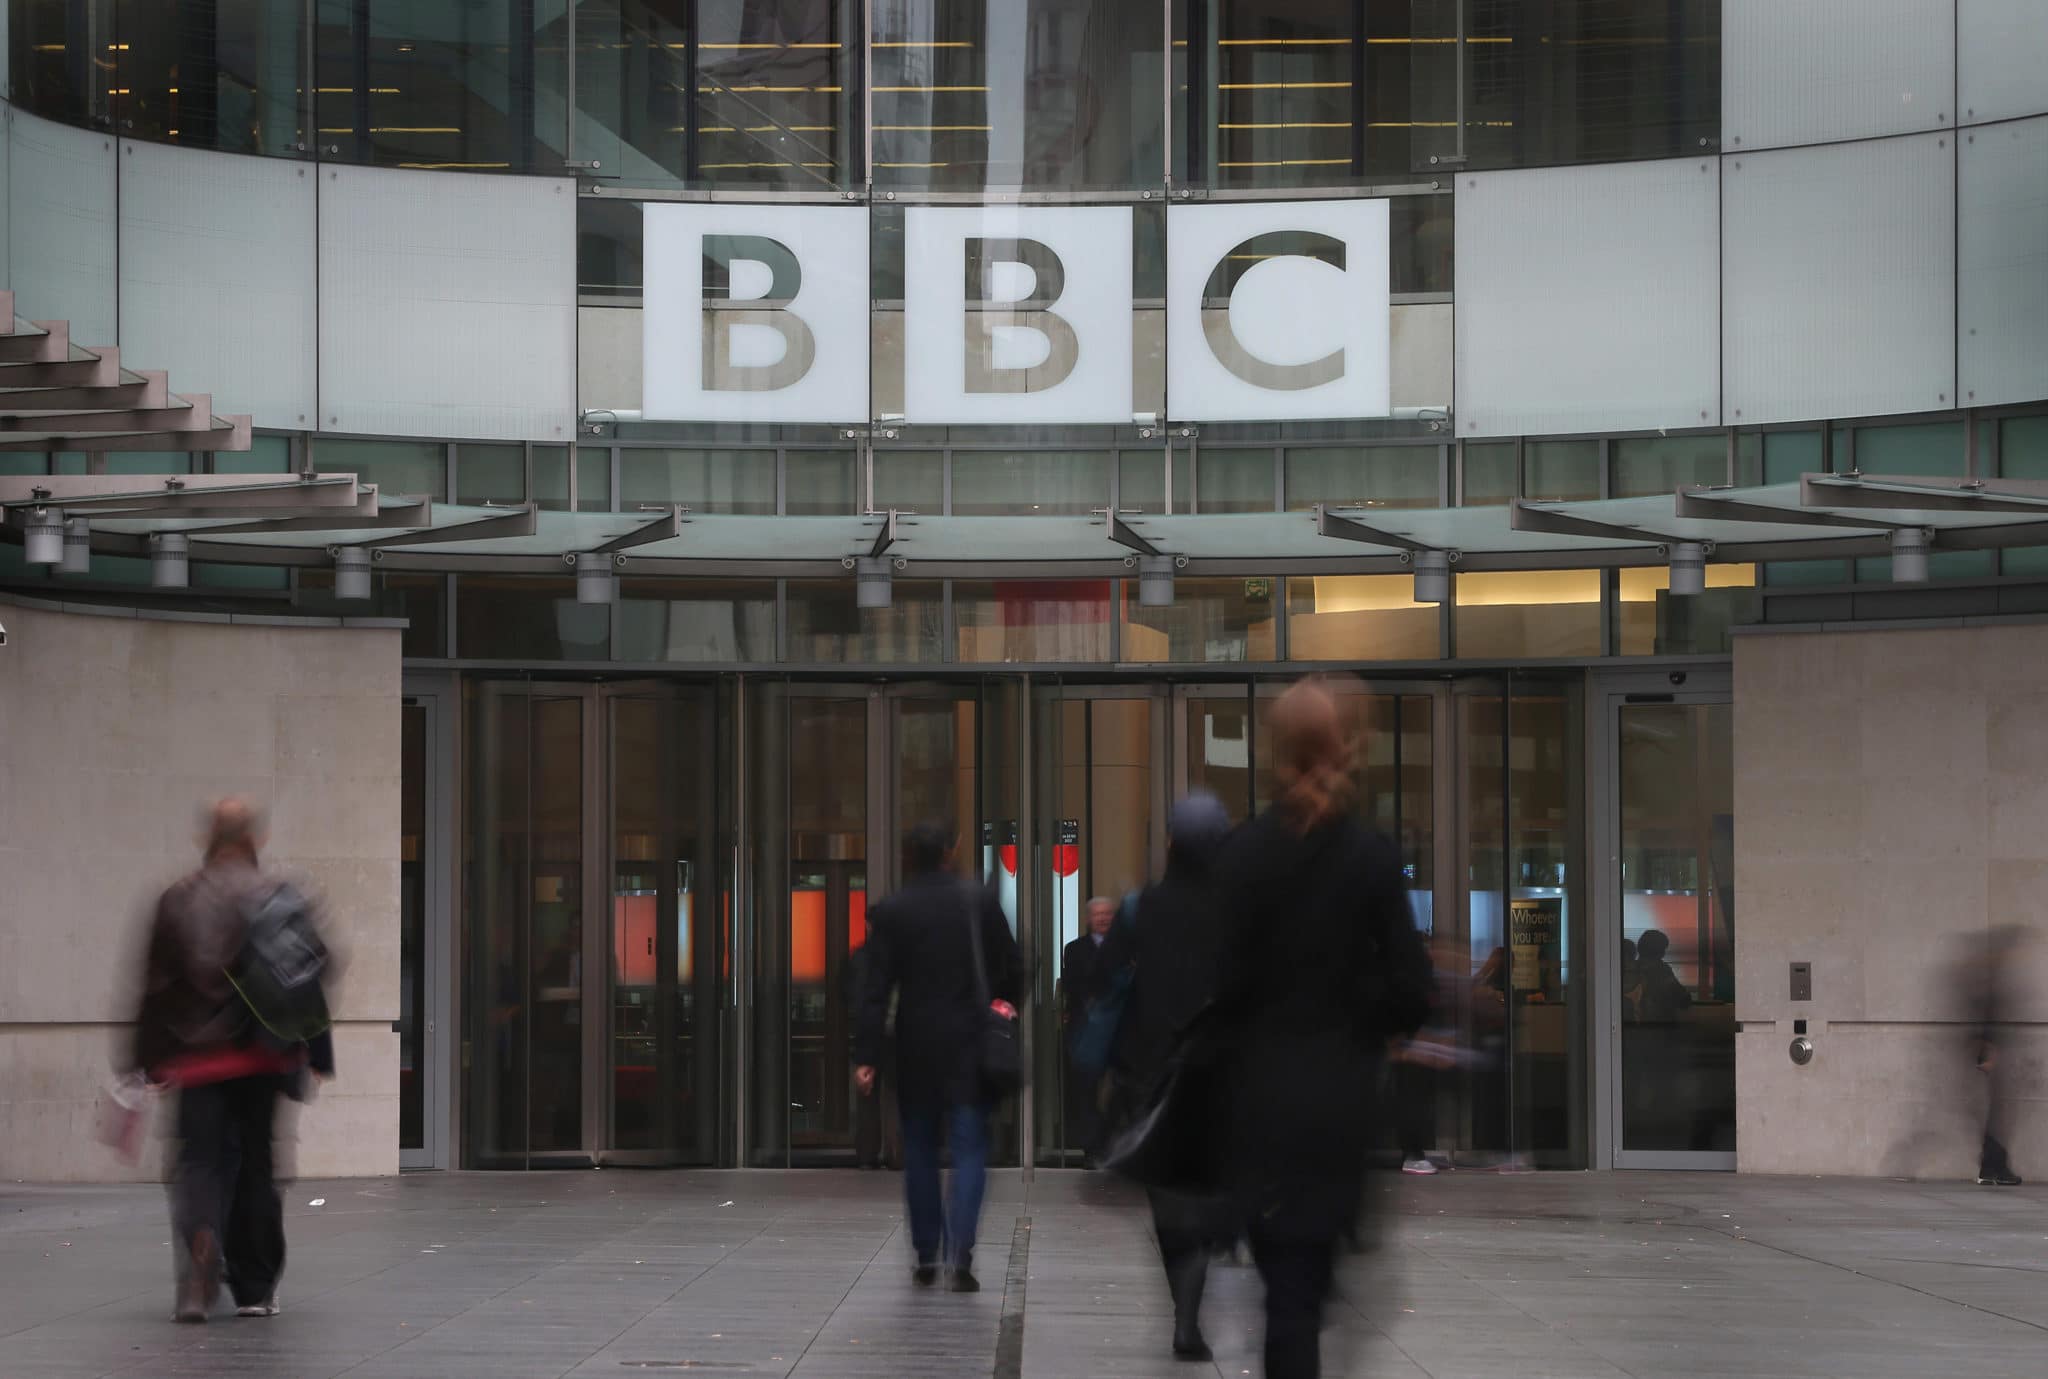 The BBC has not banned staff from attending Pride parades